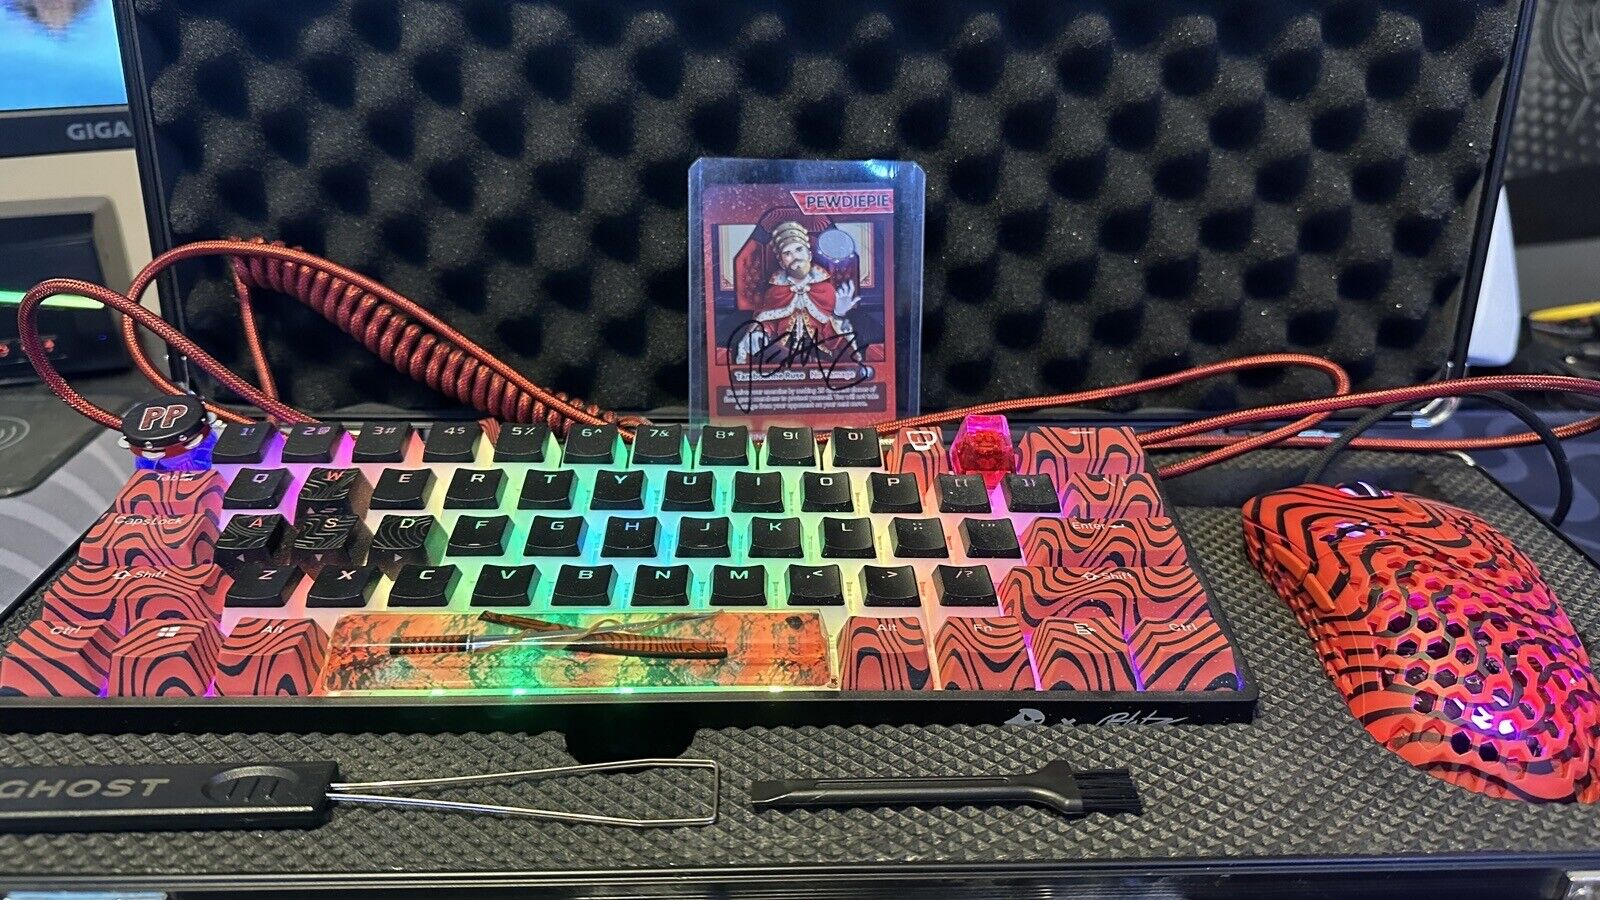 PewDiePie Ghost A1 Keyboard & Mouse + Rare Signed Card (Collectors Edition)